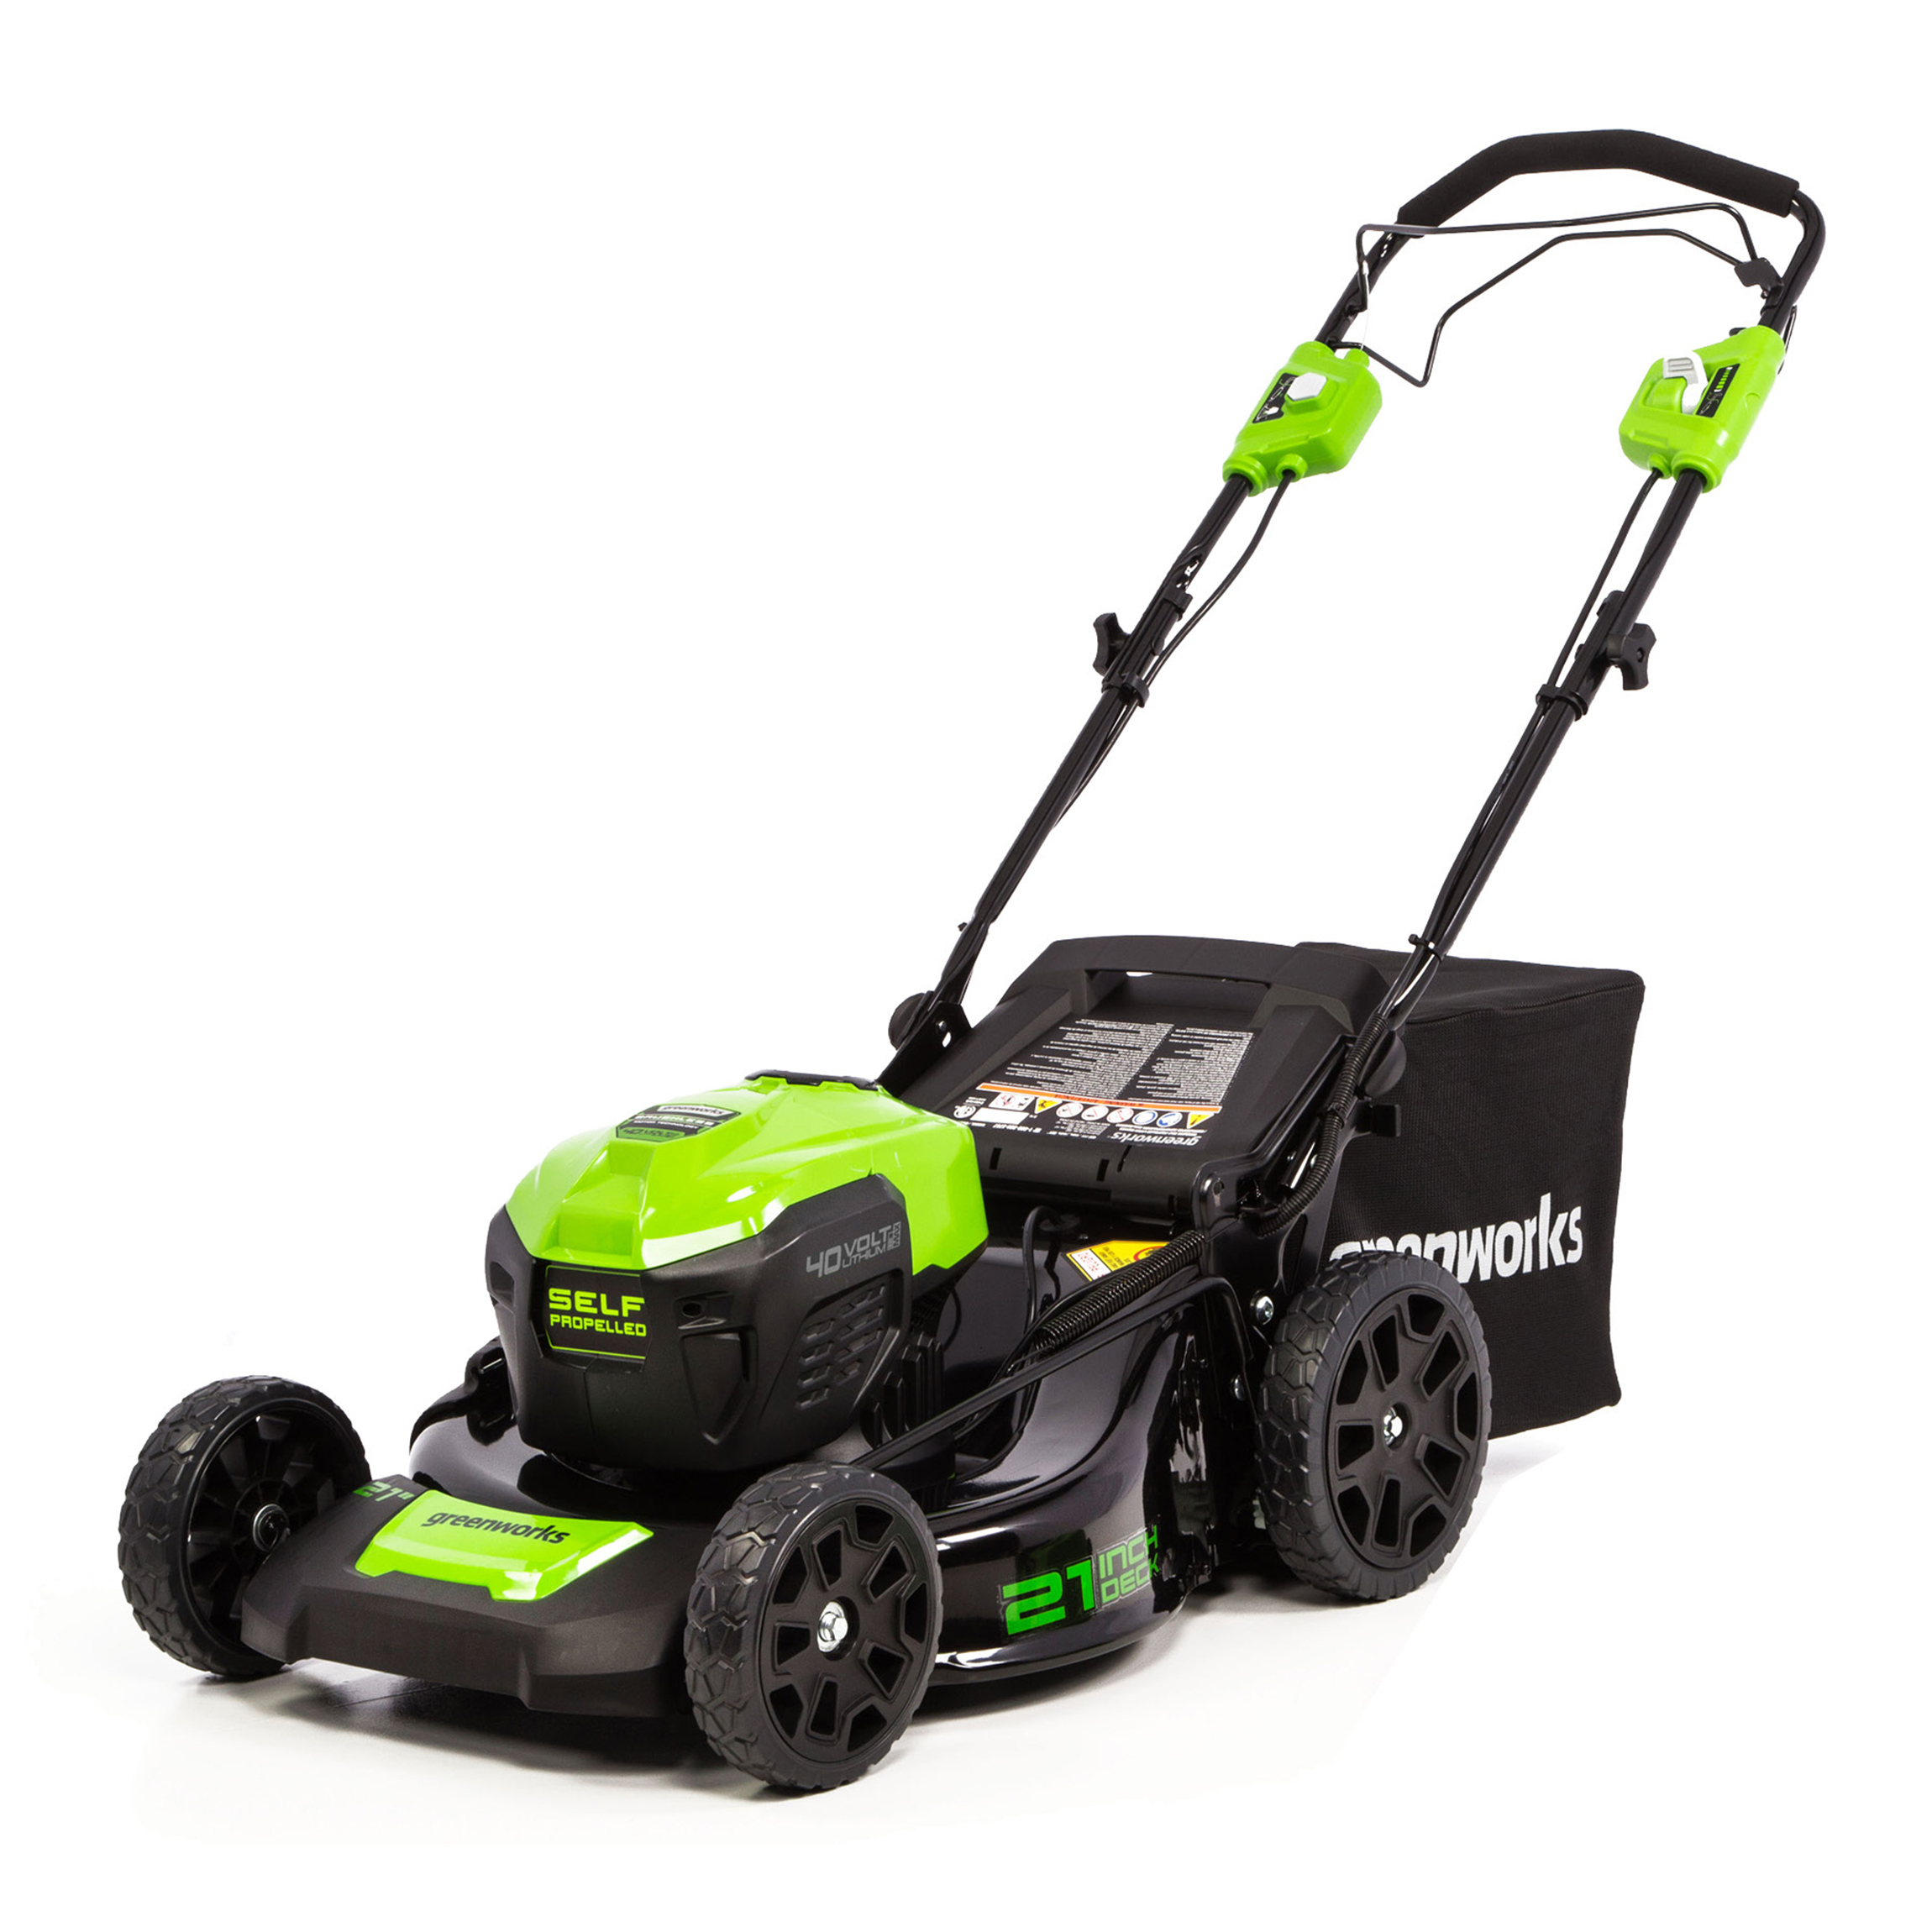 Greenworks 21" 40 Volt Battery Powered Self-Propelled Walk-Behind Mower, Battery Not Included - image 1 of 12